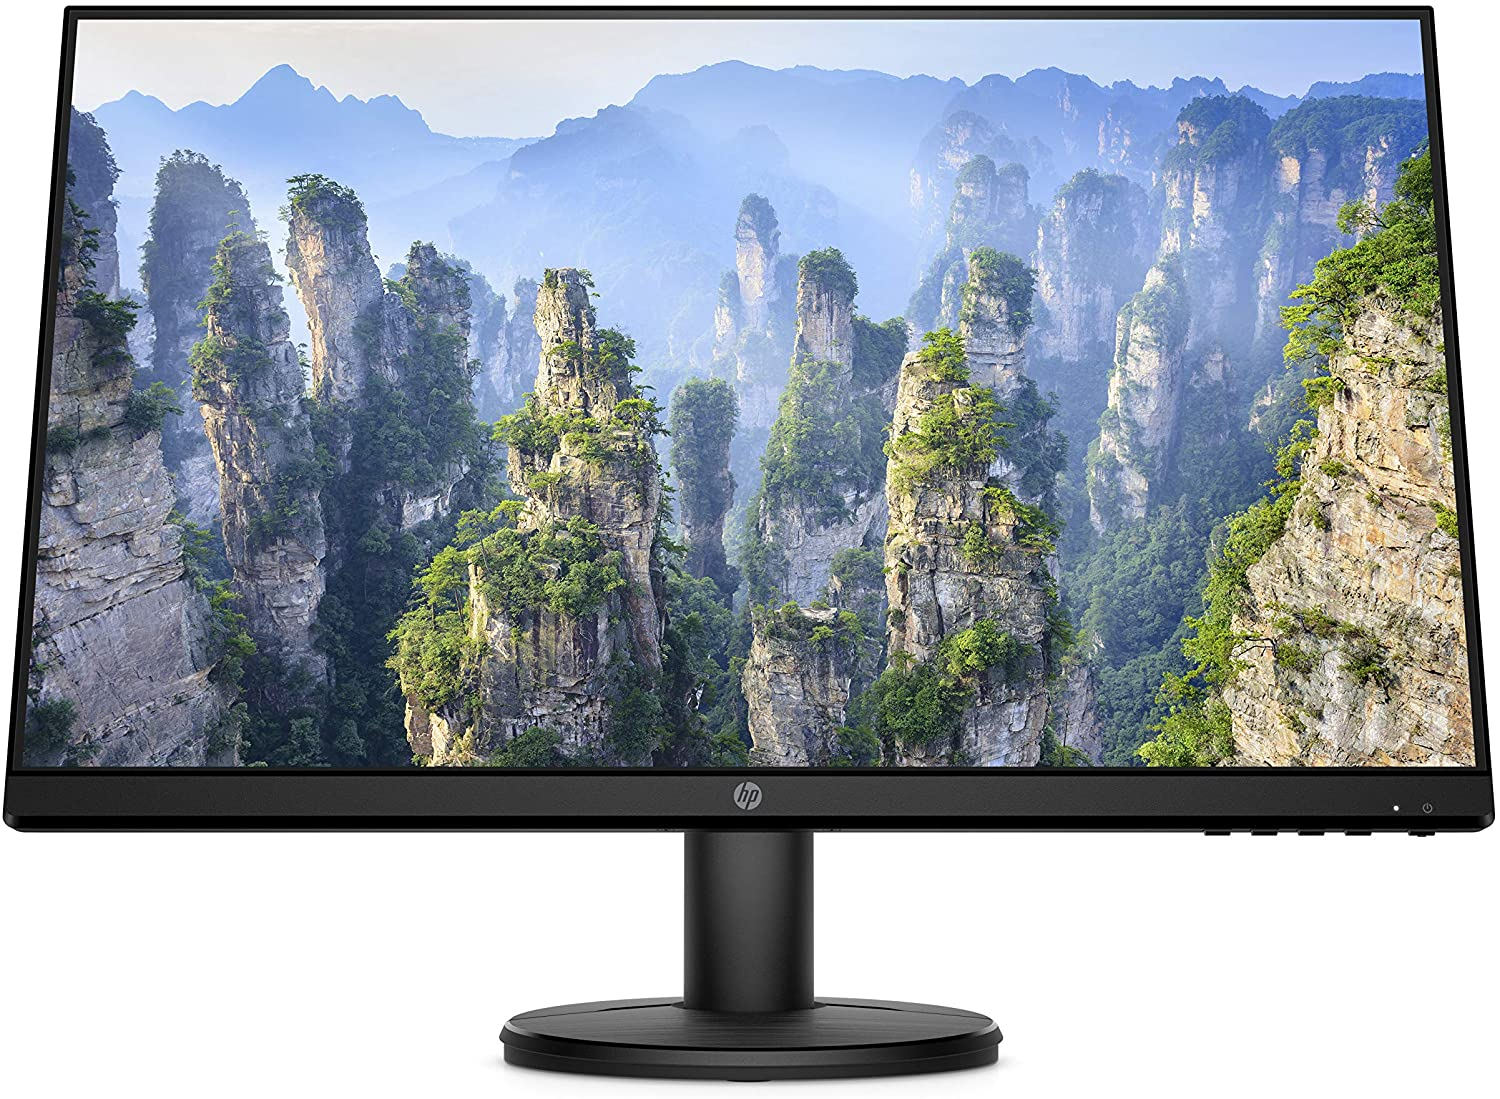 HP V24i FHD Monitor | 23.8-inch Diagonal Full HD Computer Monitor with IPS Panel and 3-Sided Micro Edge Design | Low Blue Light Screen with HDMI and VGA Ports | (9RV15AA#ABA)